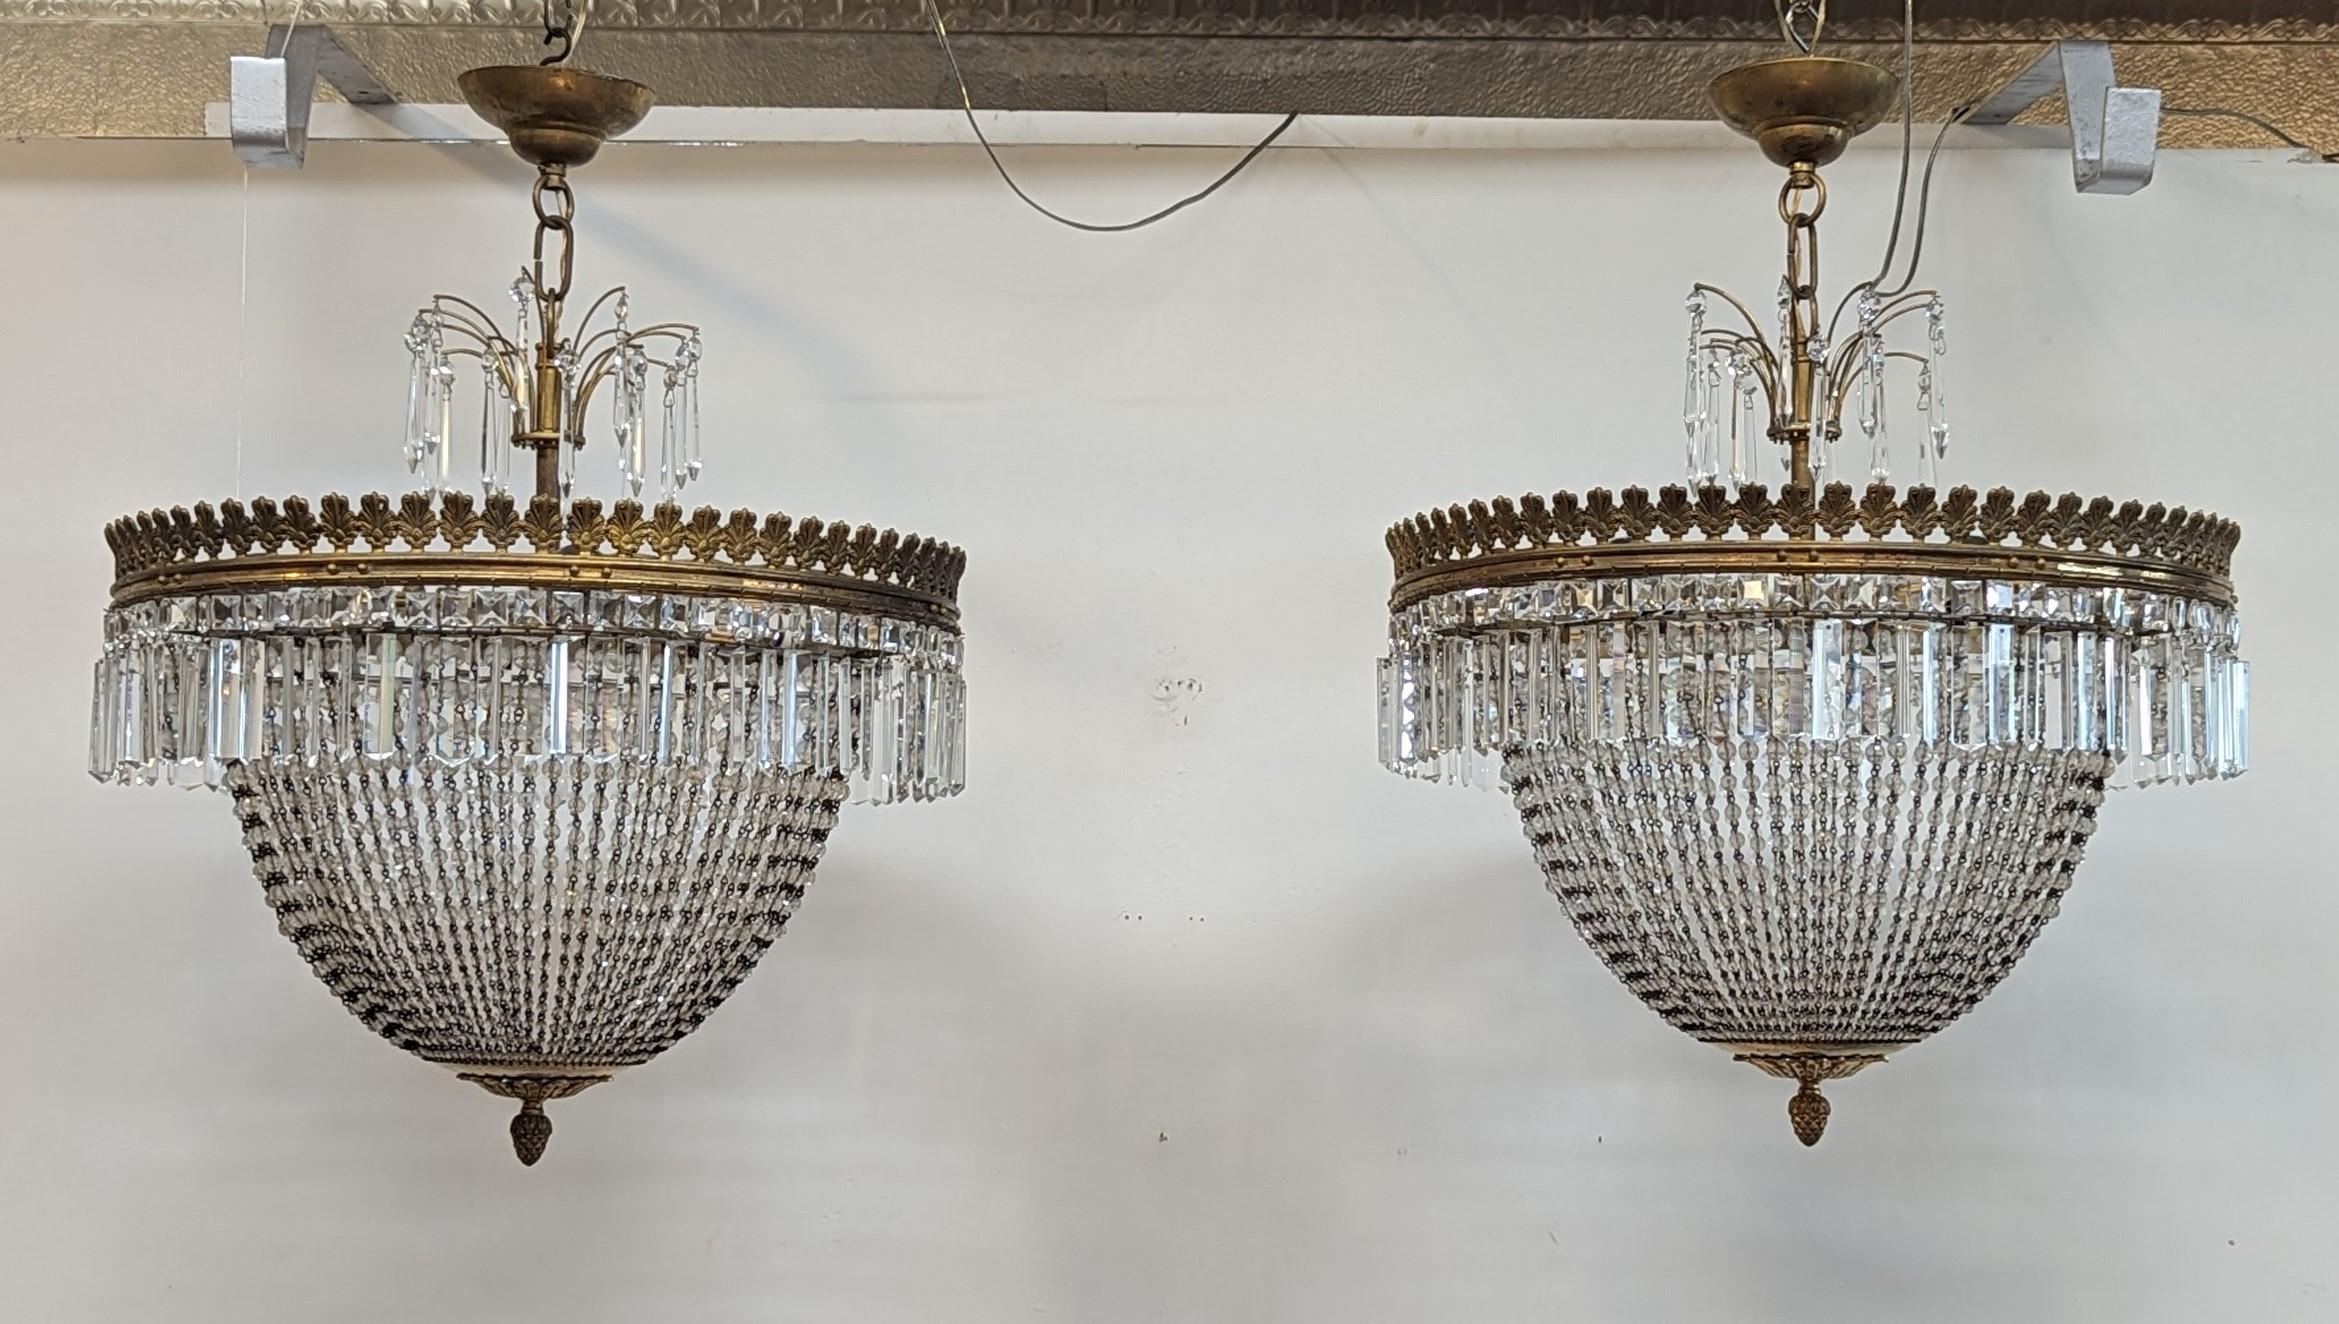 Spectacular pair of Antique French Crystal and Gilt Bronze Chandeliers.  
A matched pair of early 20th century French Basket Chandeliers.  1920's French Empire inspired Crystal and Gilt Bronze Chandeliers.  Draped graduated facet cut crystal beads